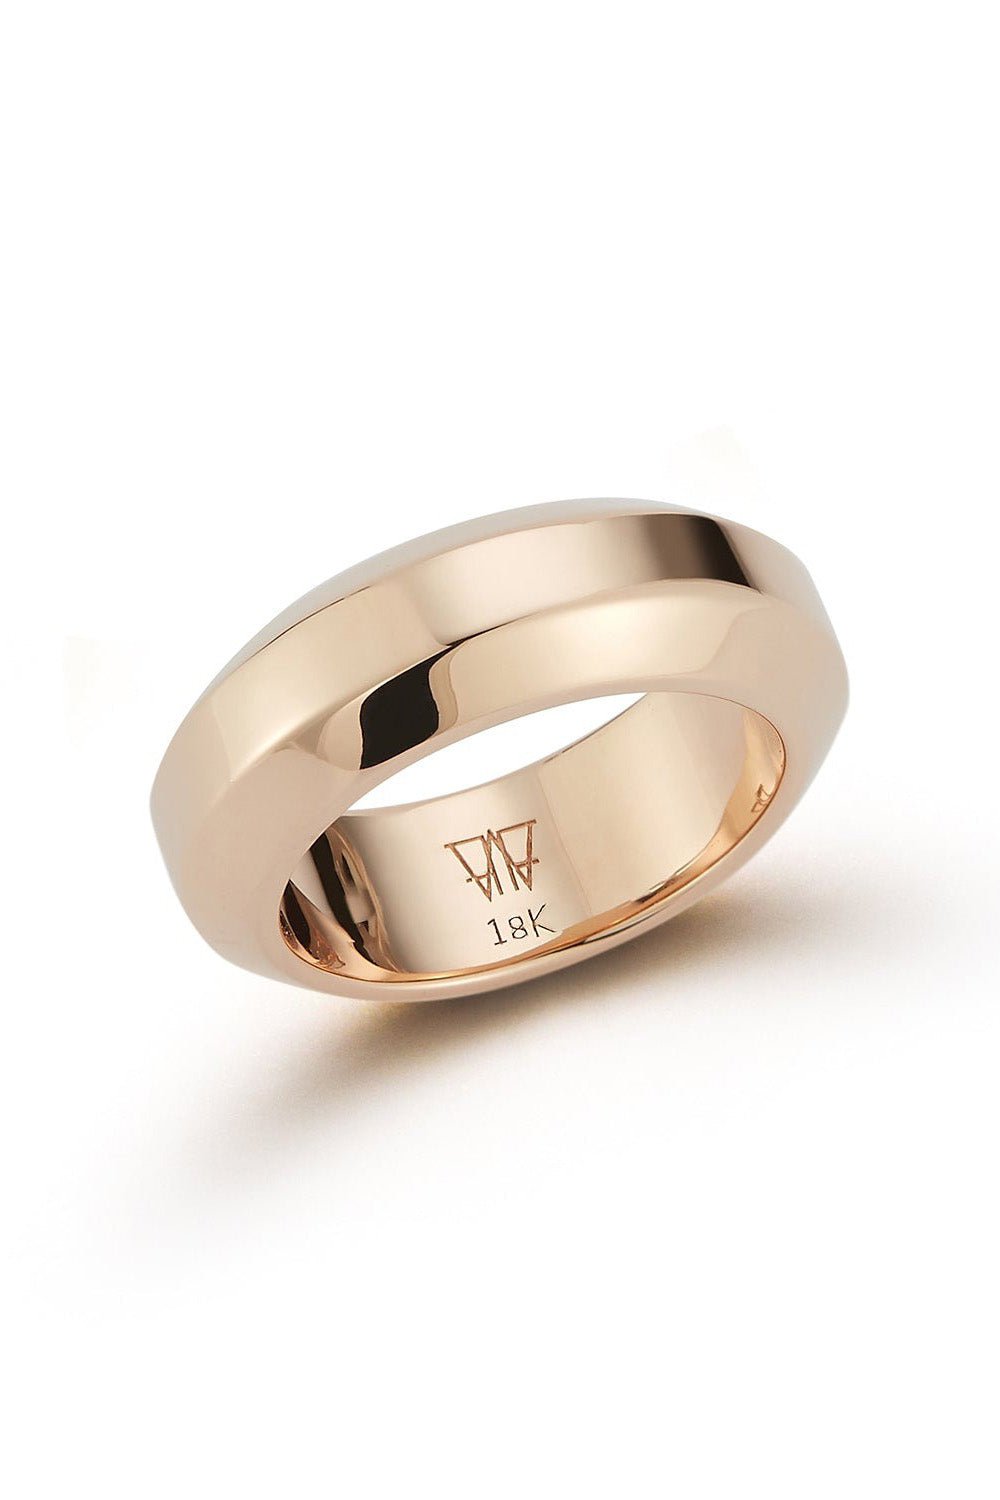 WALTERS FAITH-Grant Band Ring-ROSE GOLD